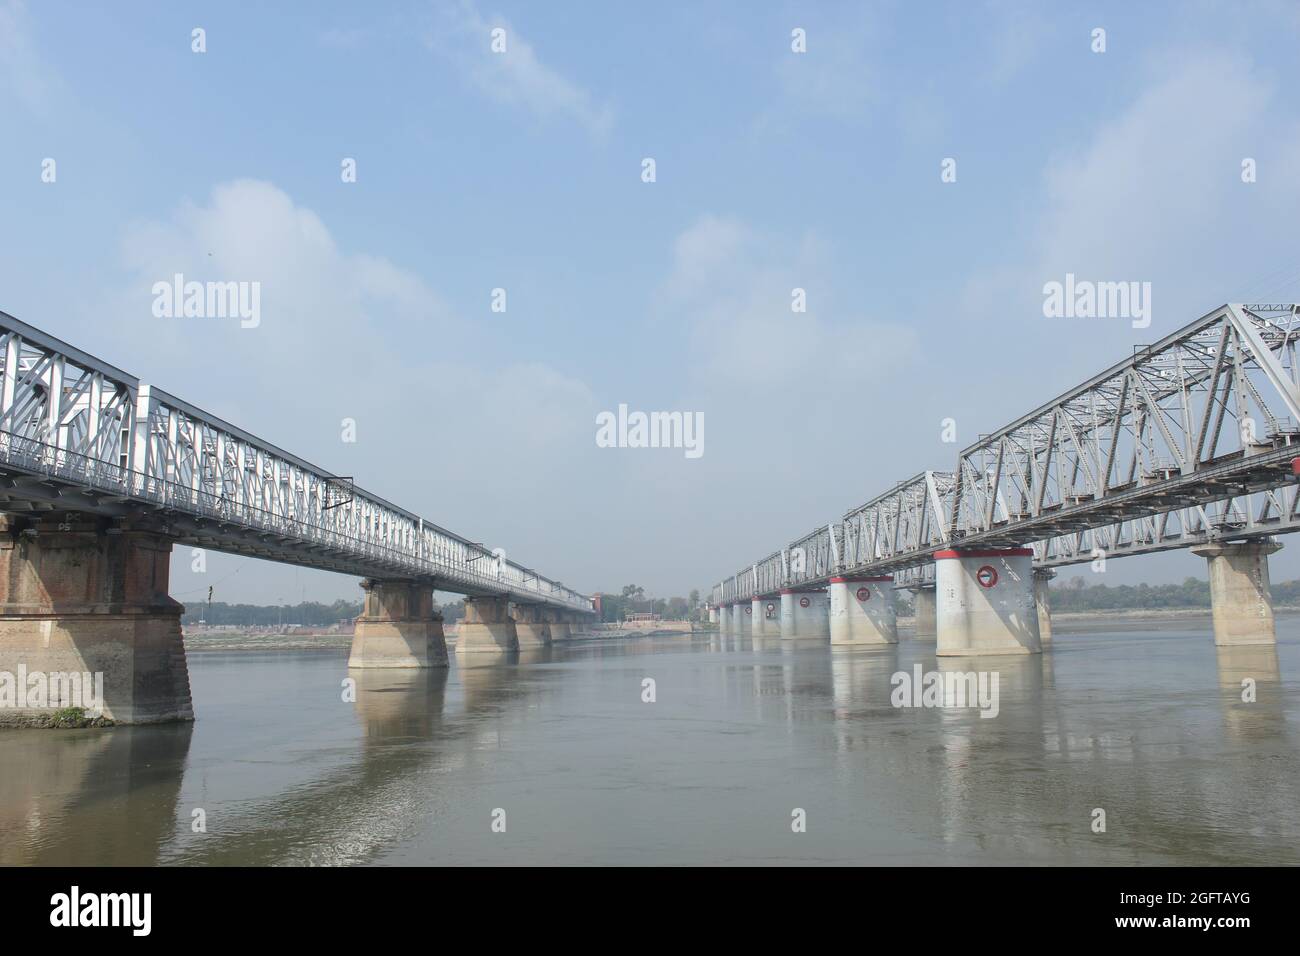 The bridge of  Indian Railways in Bihar, and railway workers working on the track. Stock Photo